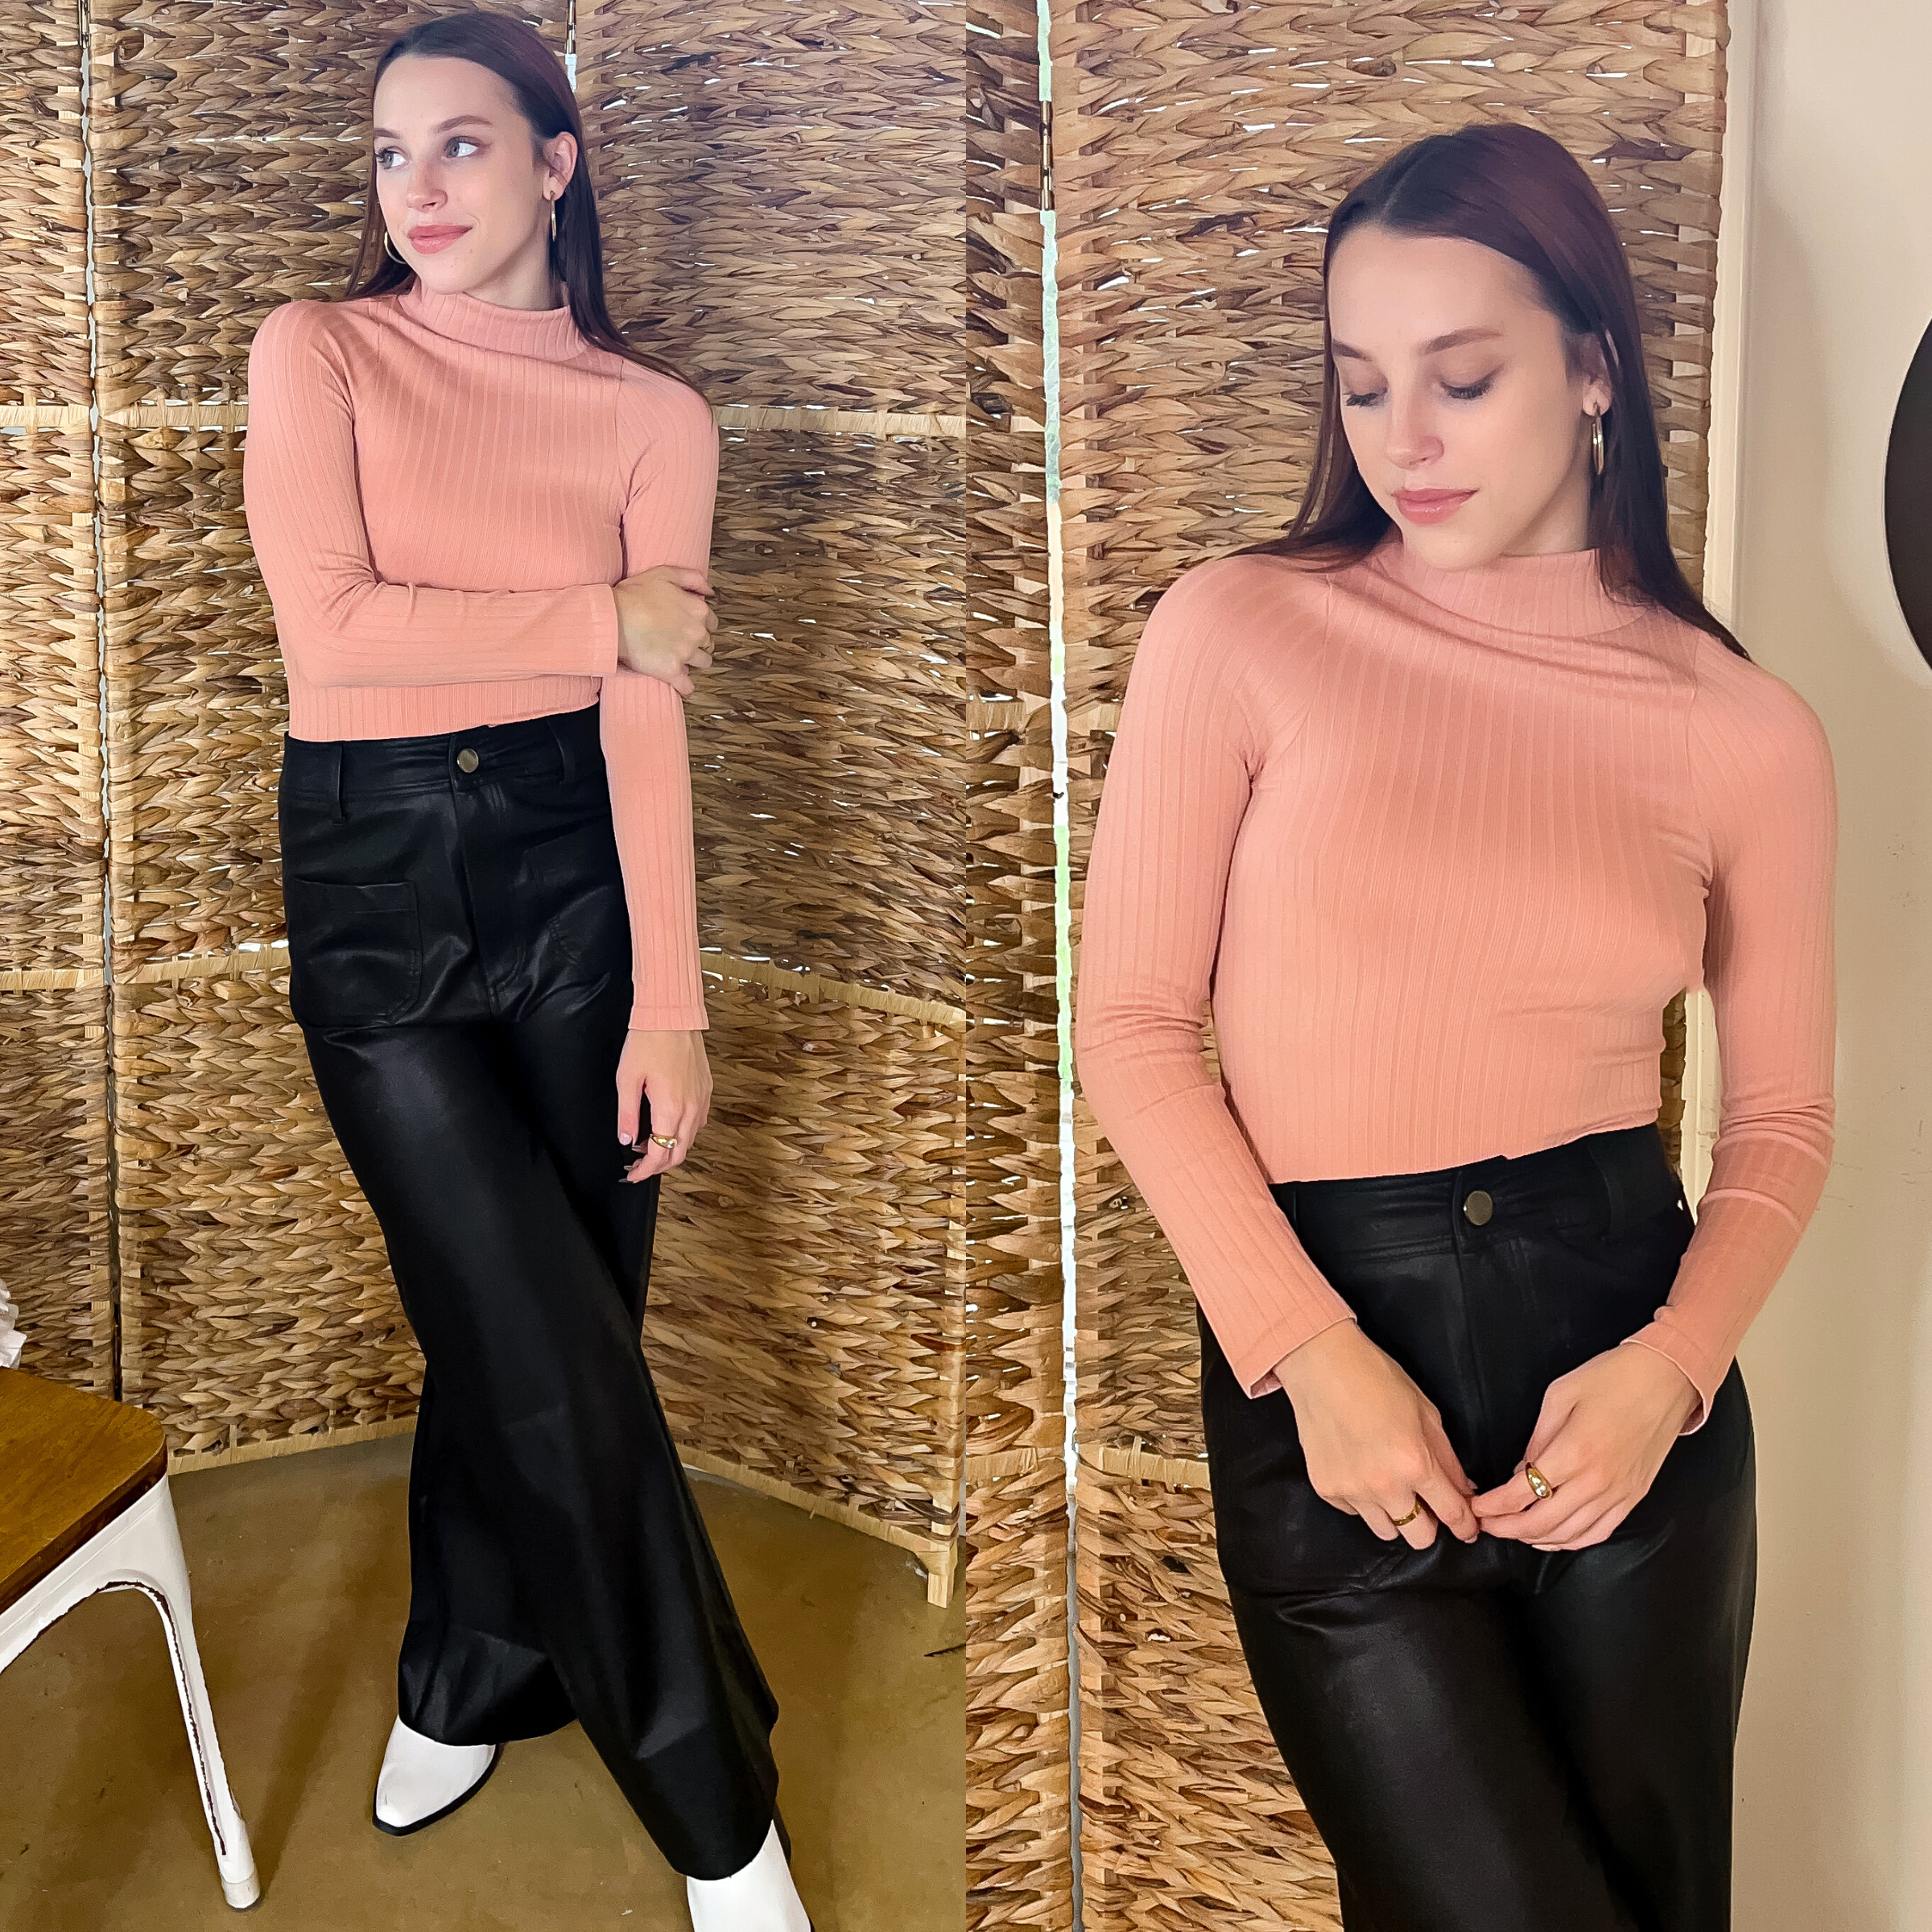 Model is wearing a high neck, ribbed long sleeve top in light pink. She is also wearing black leather pants with white boots, gold earrings and rings. 